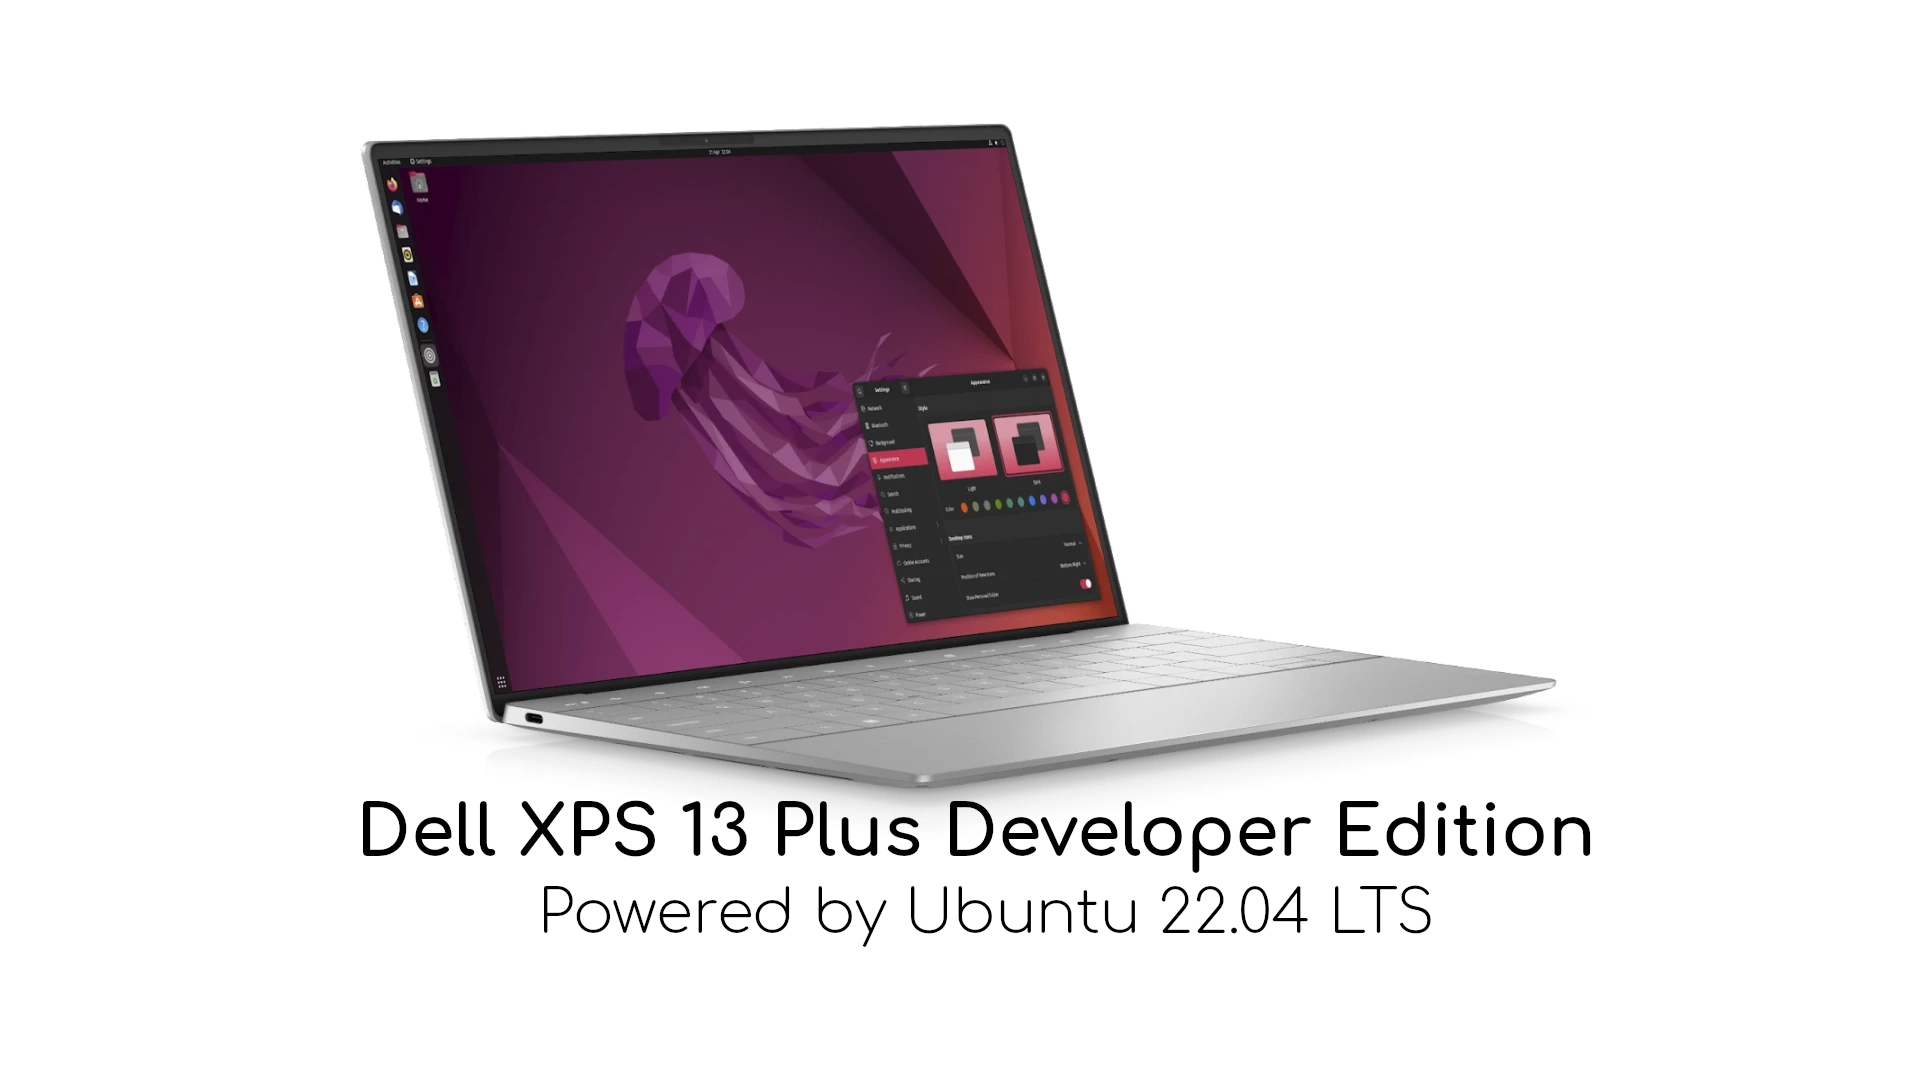 Dell XPS 13 Plus Developer Edition Laptop Is Now Certified for Ubuntu 22.04 LTS